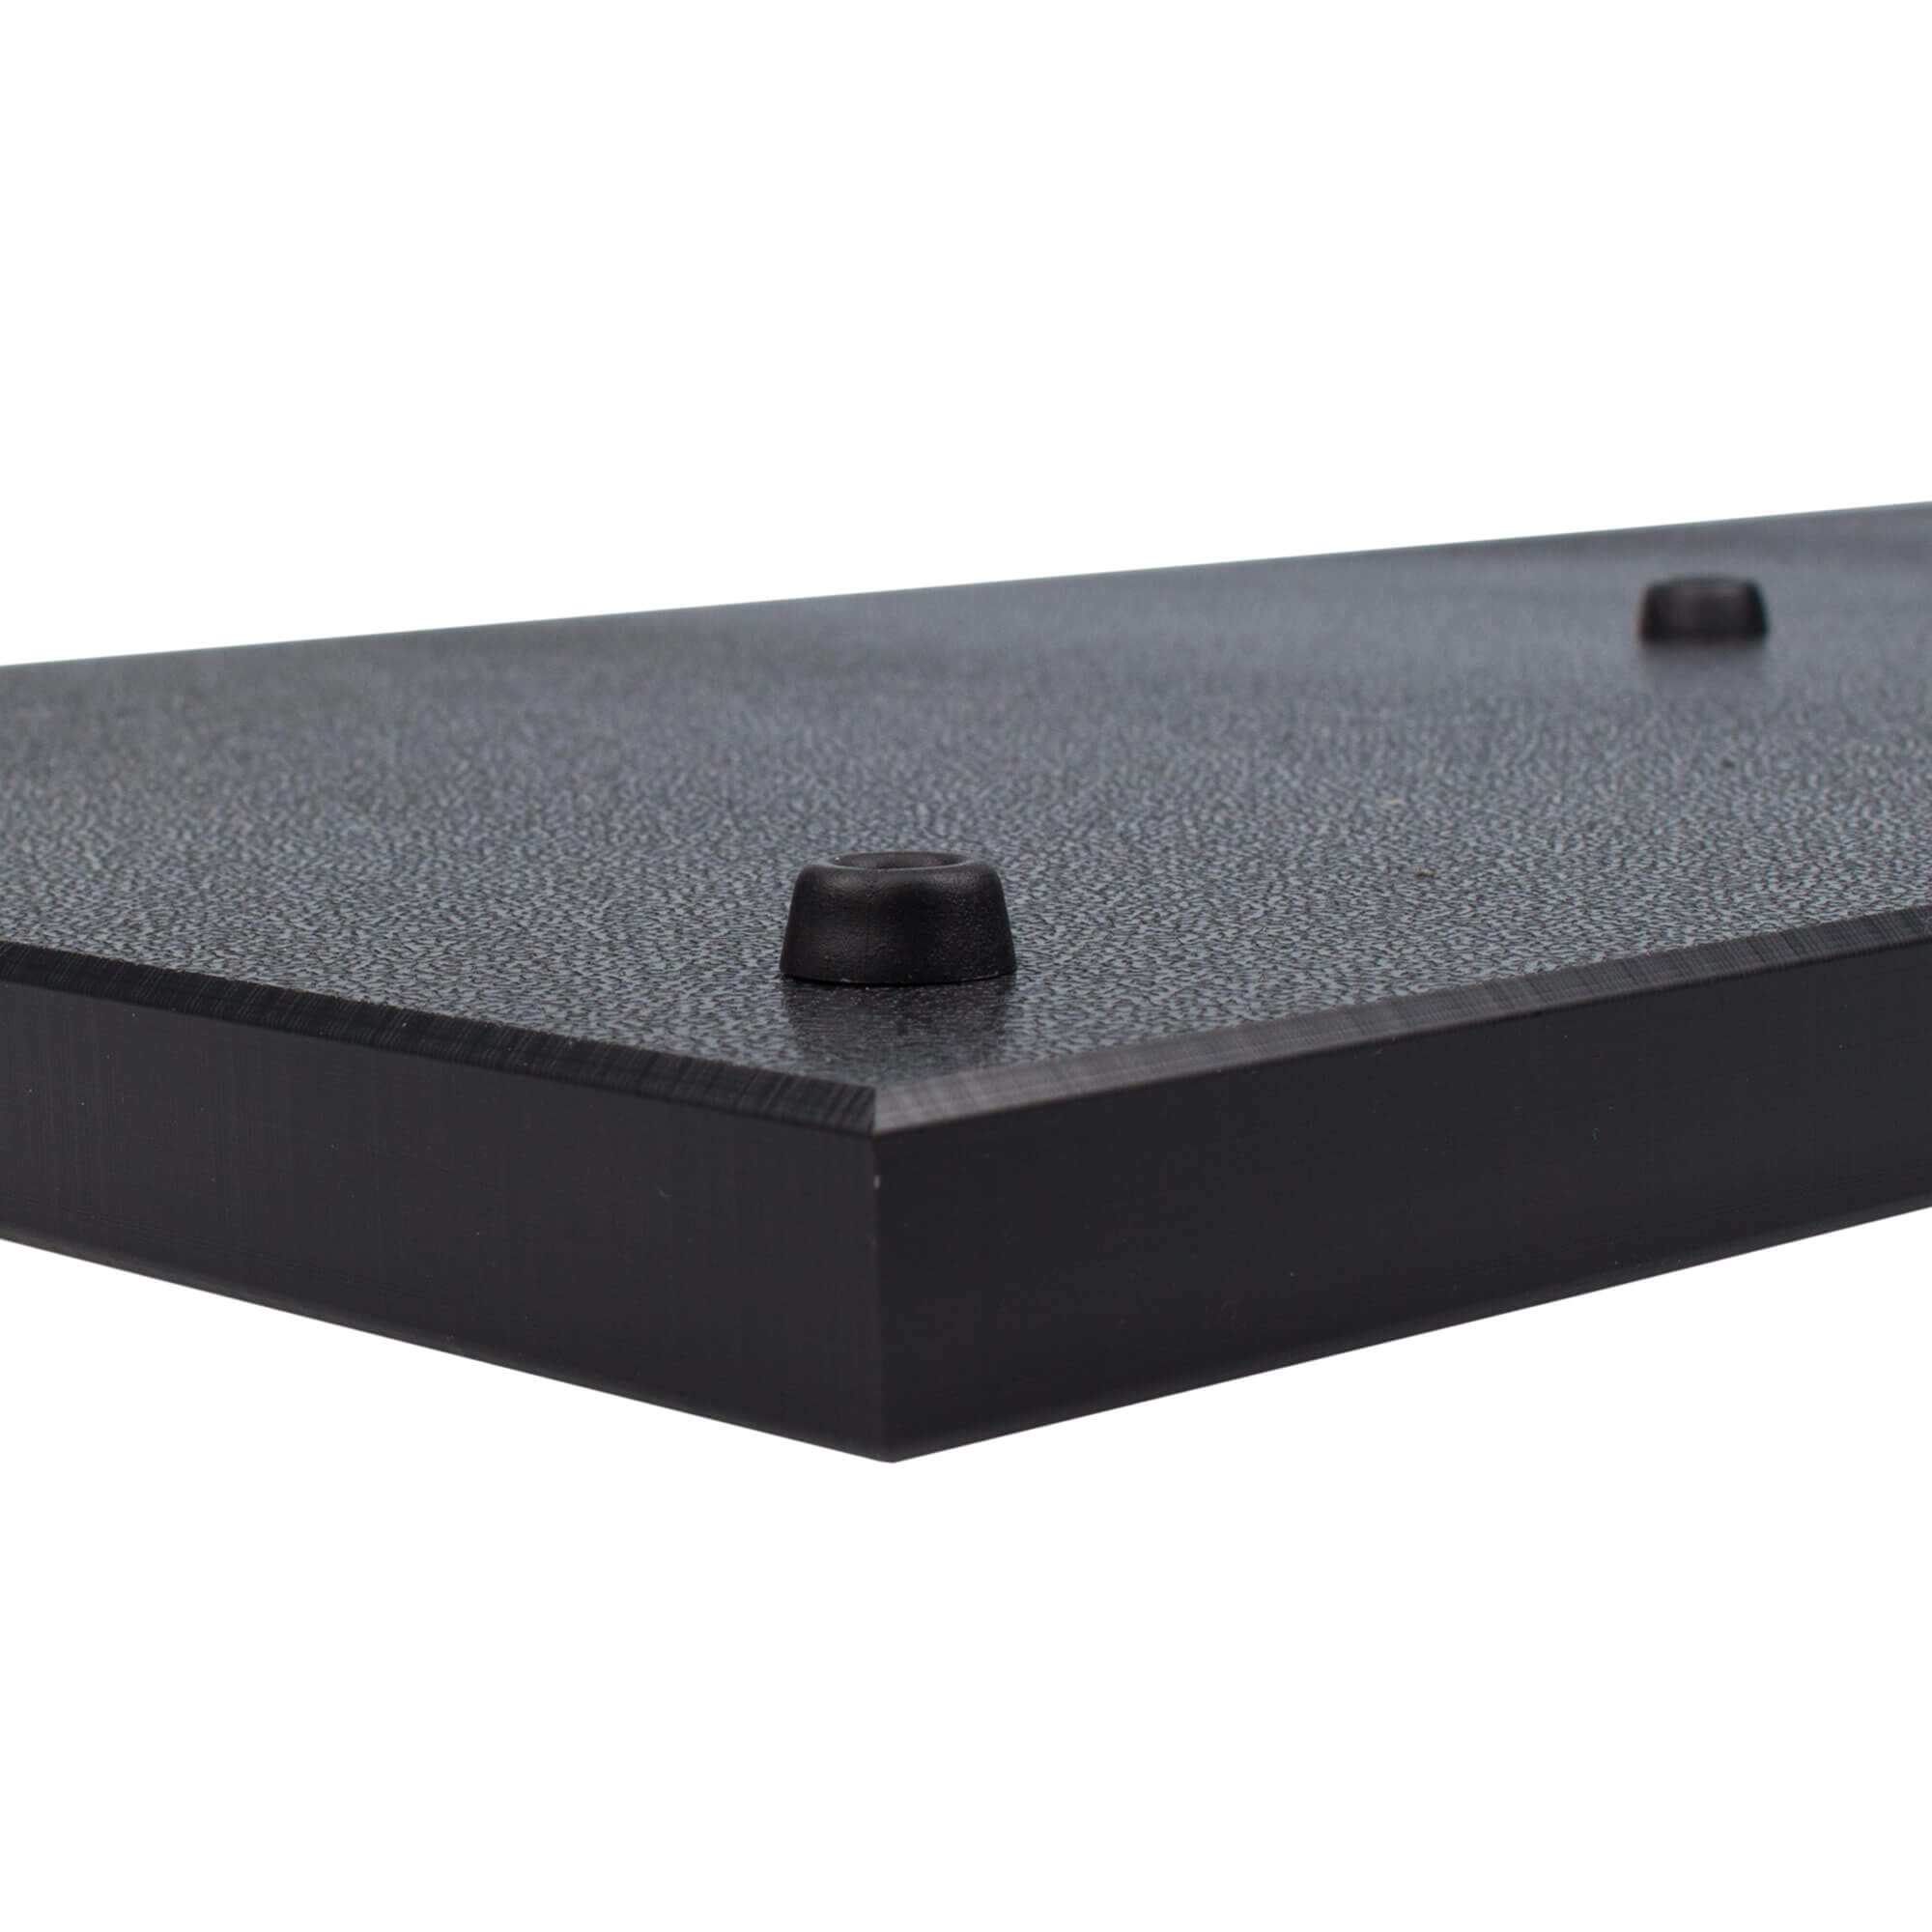 Cutting board with juice groove, HDPE black - 49,5x29,5cm